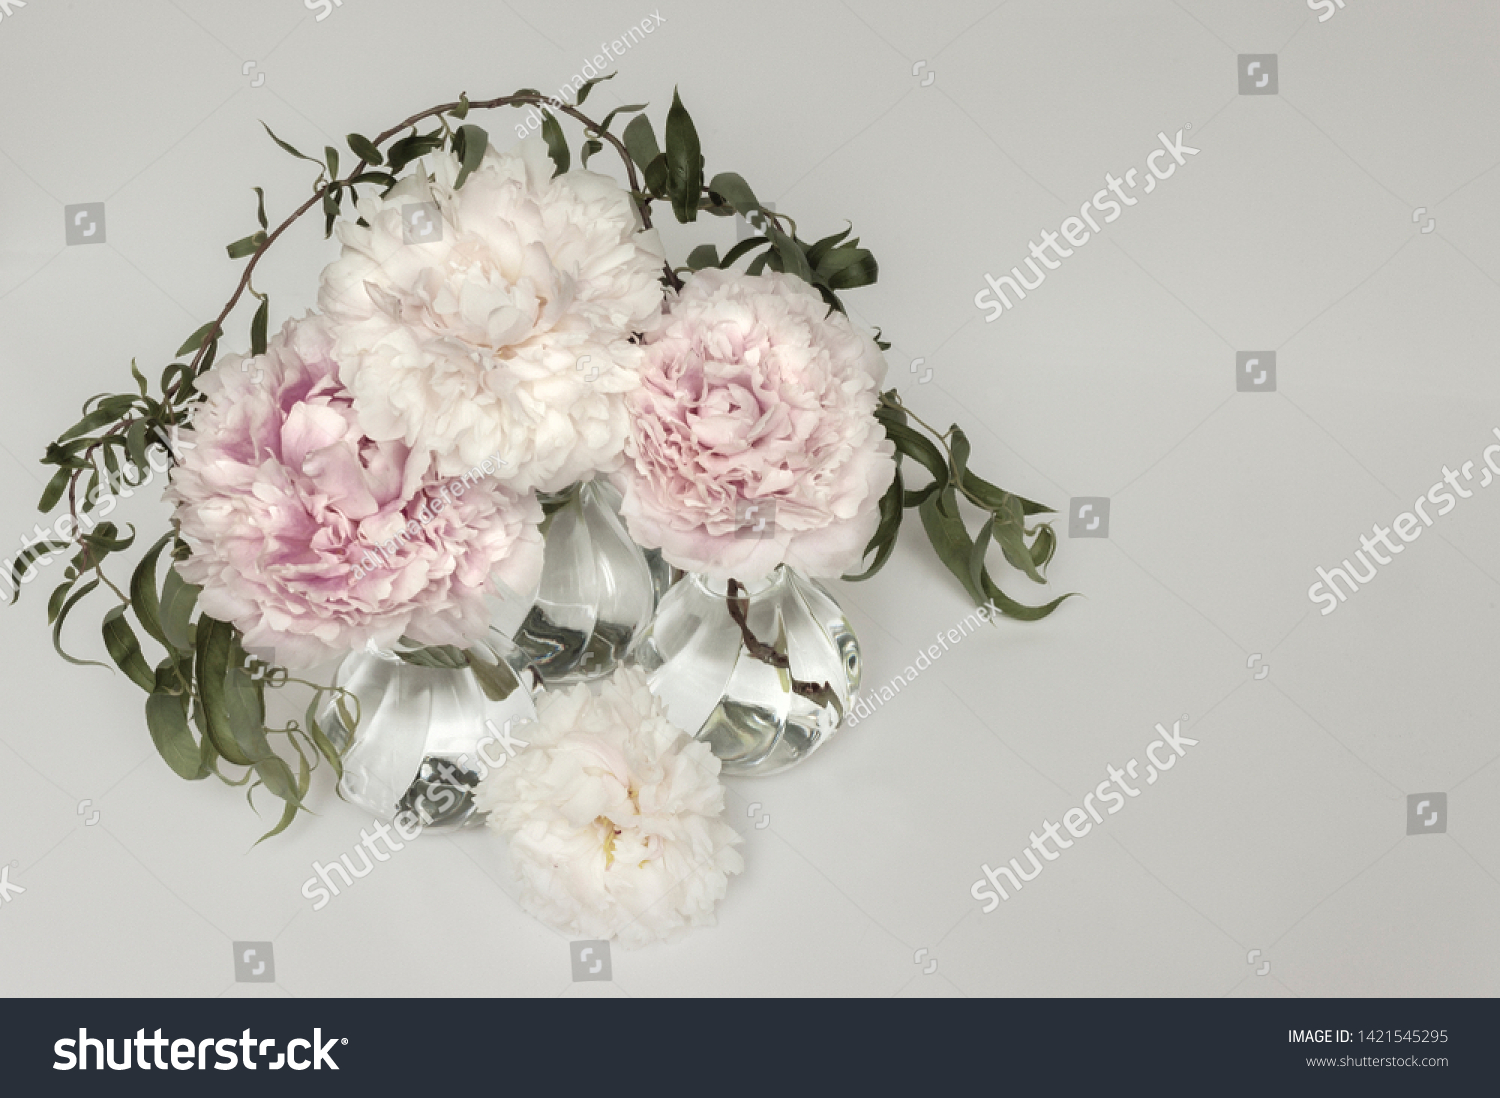 Three Small Round Glass Vases with Peonies of Various Shades of Pink and Willow Branches on a Light Background Seen From Below in Soft Delicate Colors #1421545295